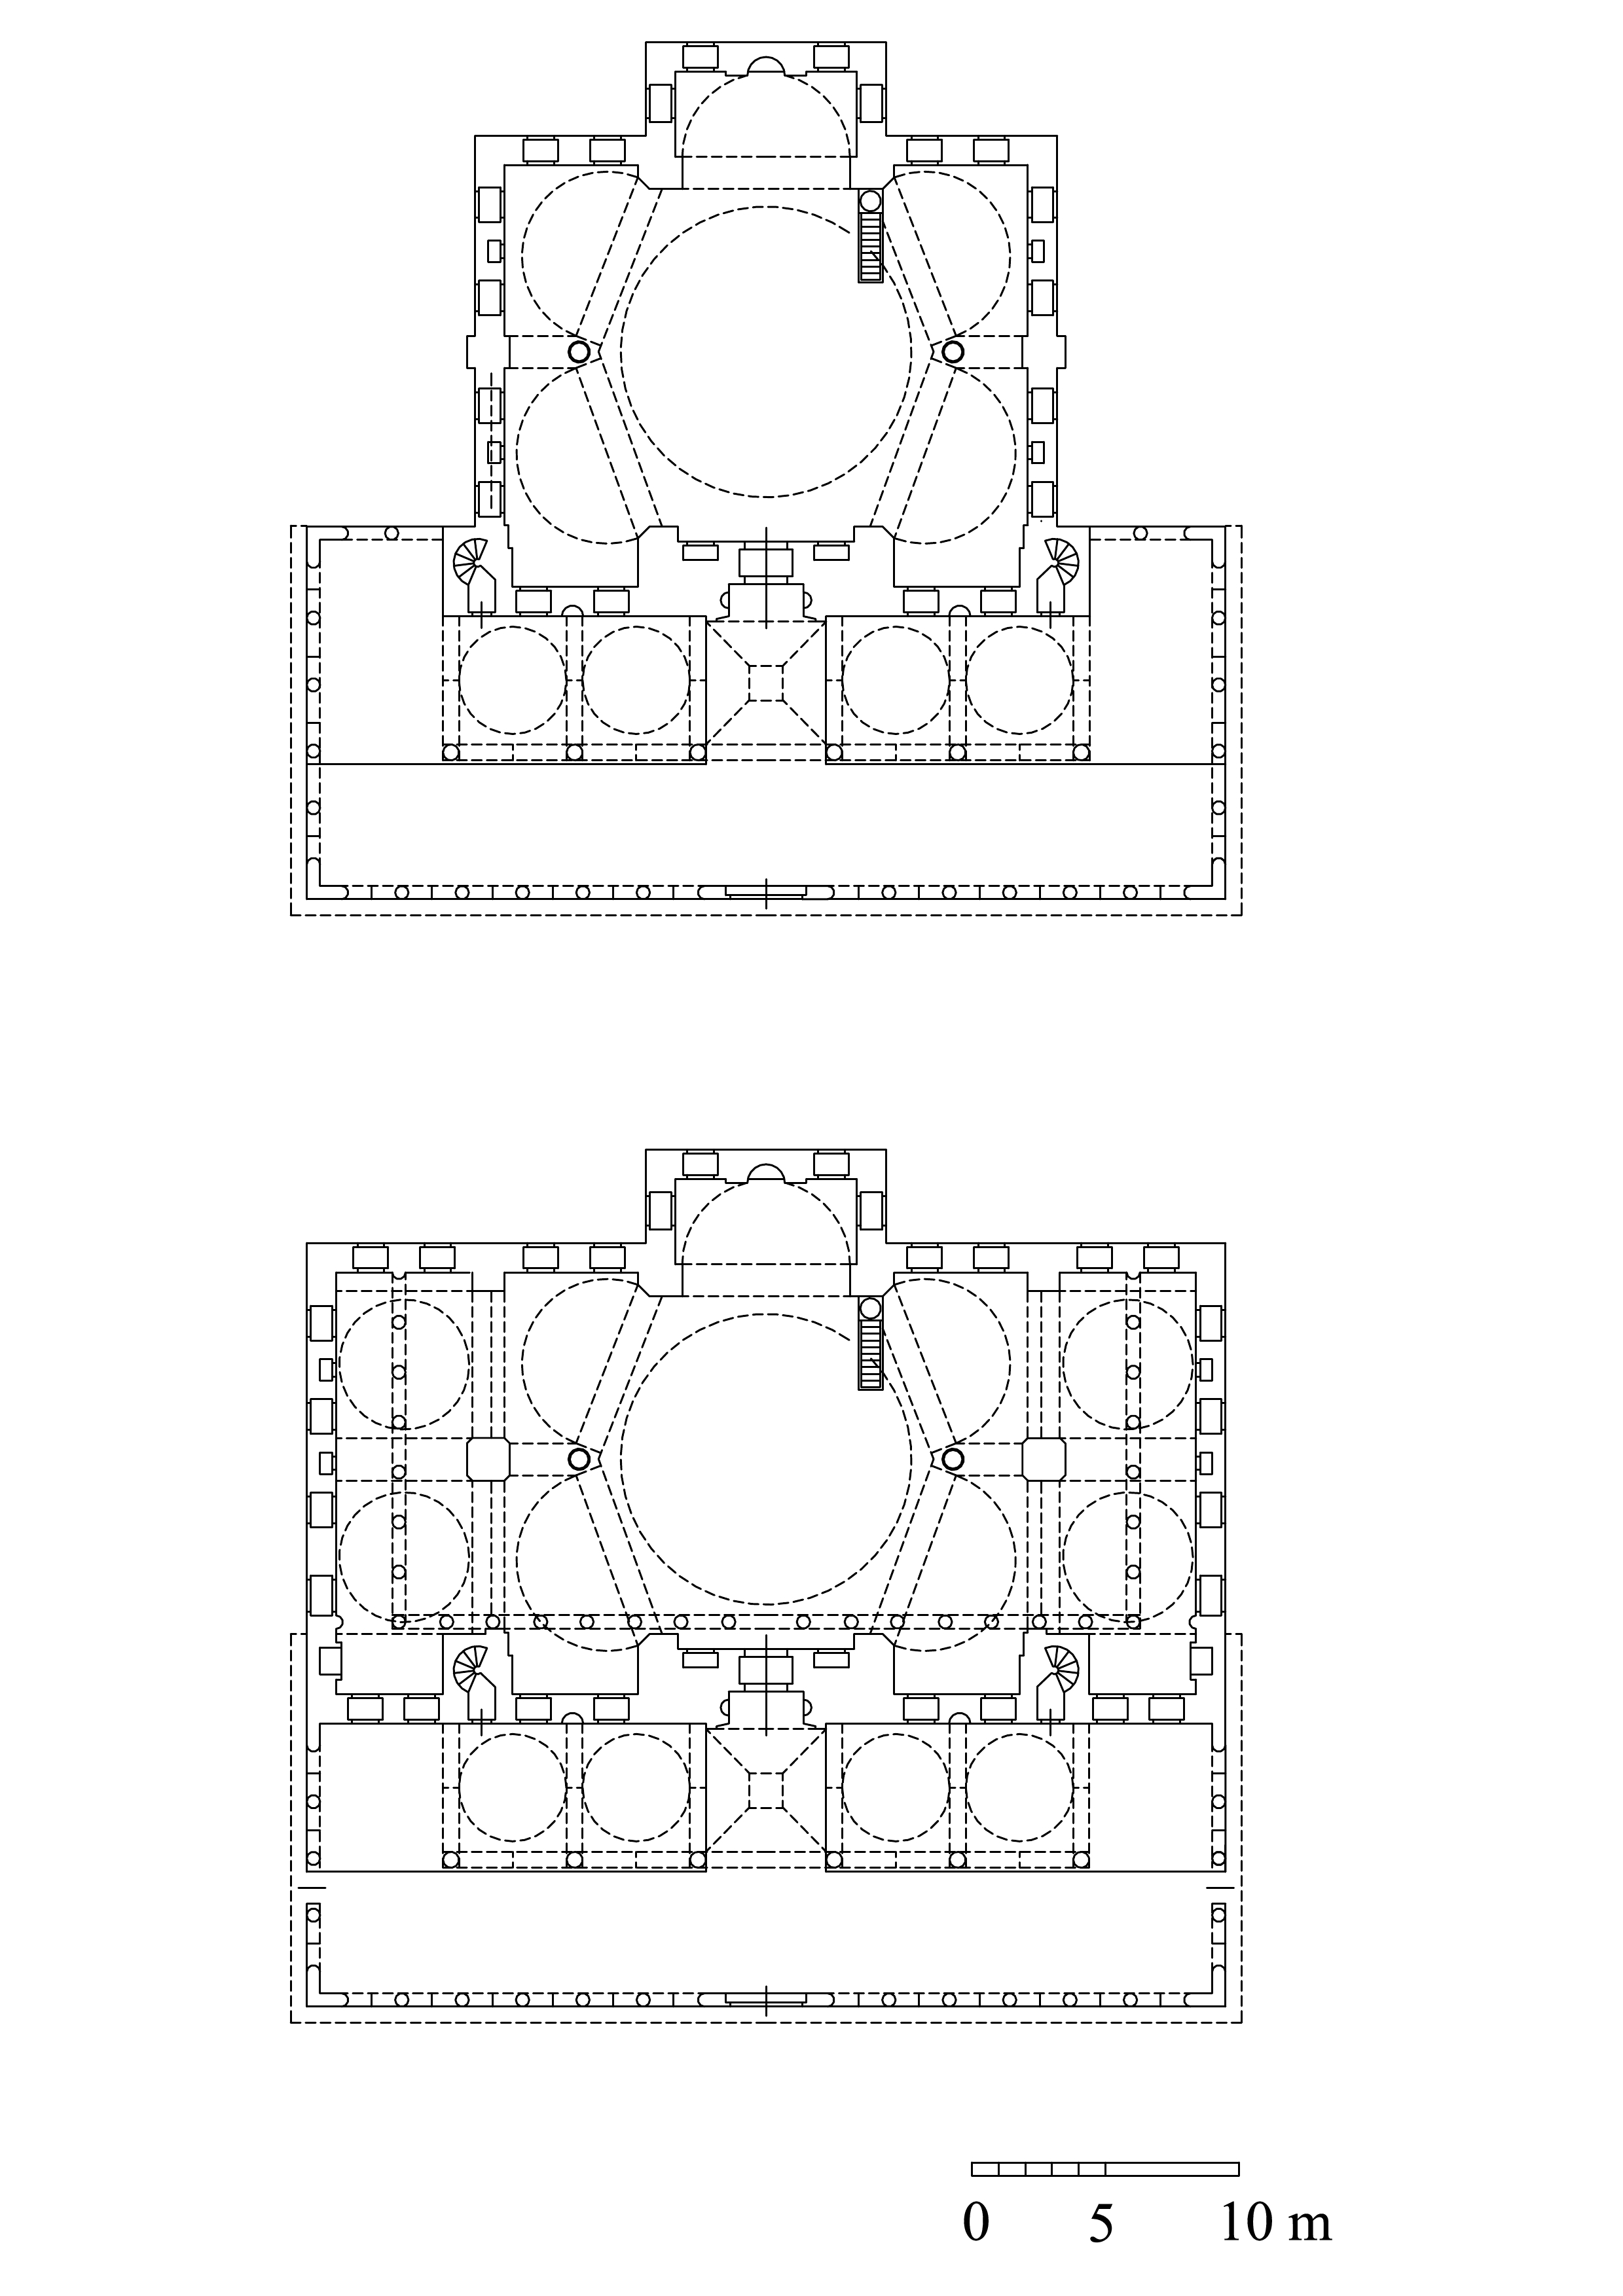 Atik Valide Külliyesi - Floor plan of mosque showing the second and third stages of construction. DWG file in AutoCAD 2000 format. Click the download button to download a zipped file containing the .dwg file.